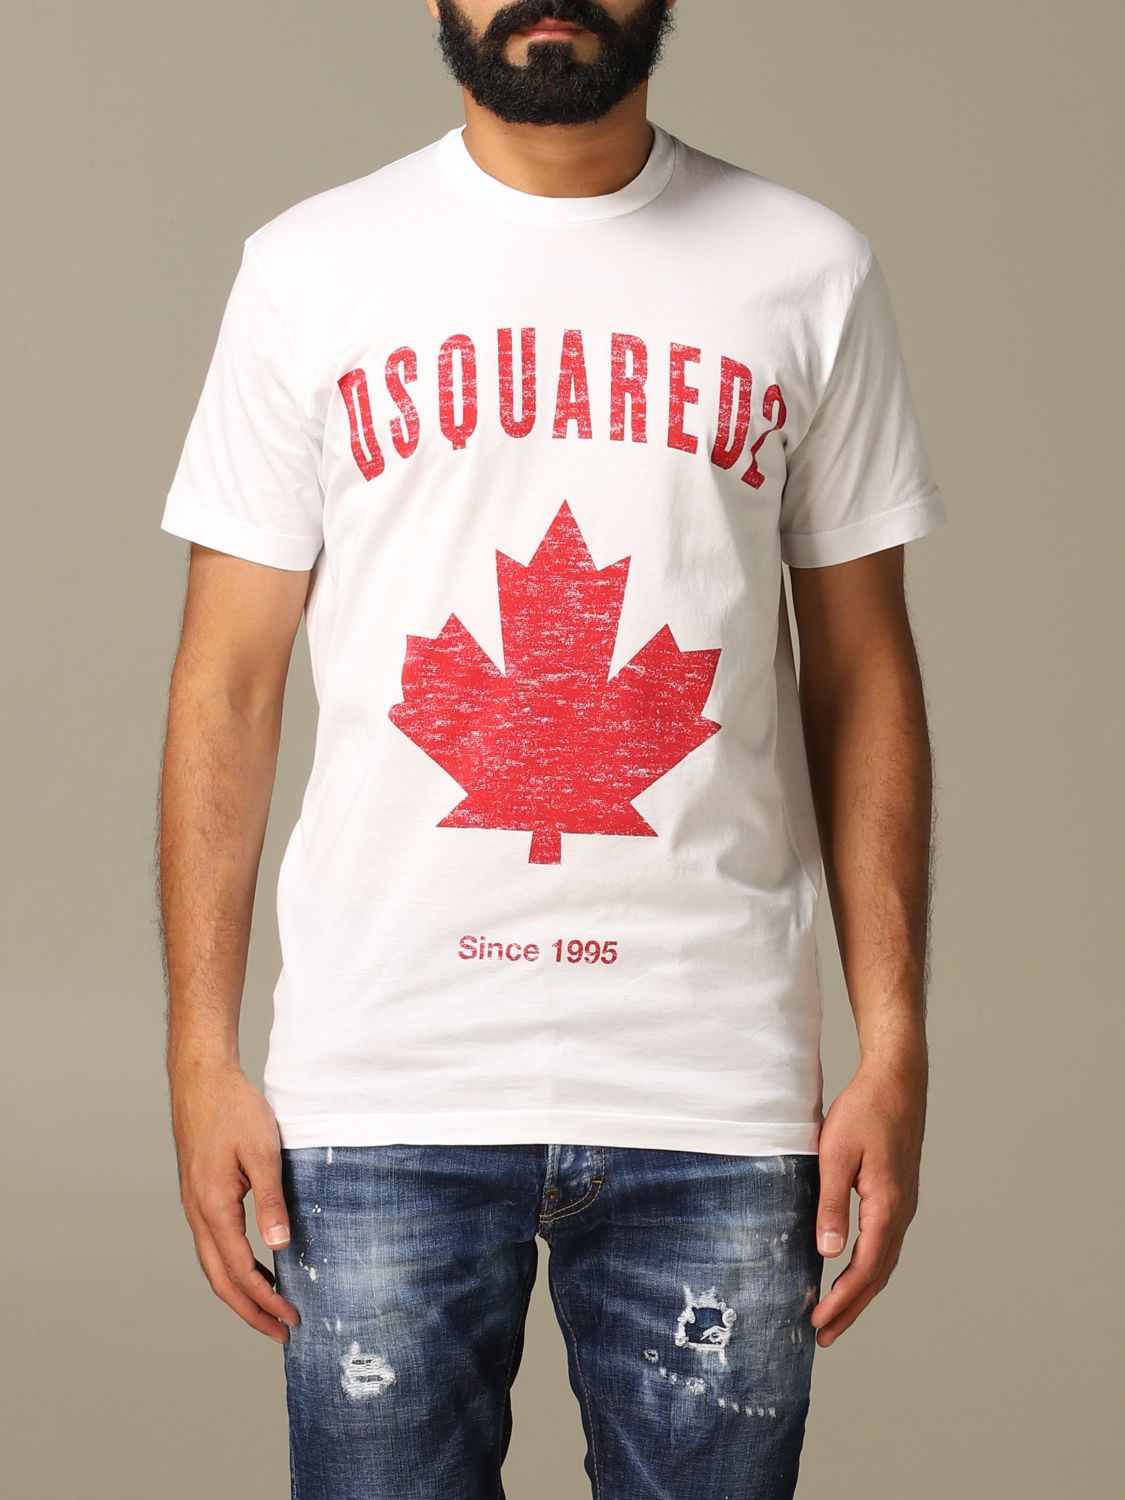 dsquared t shirt white and red